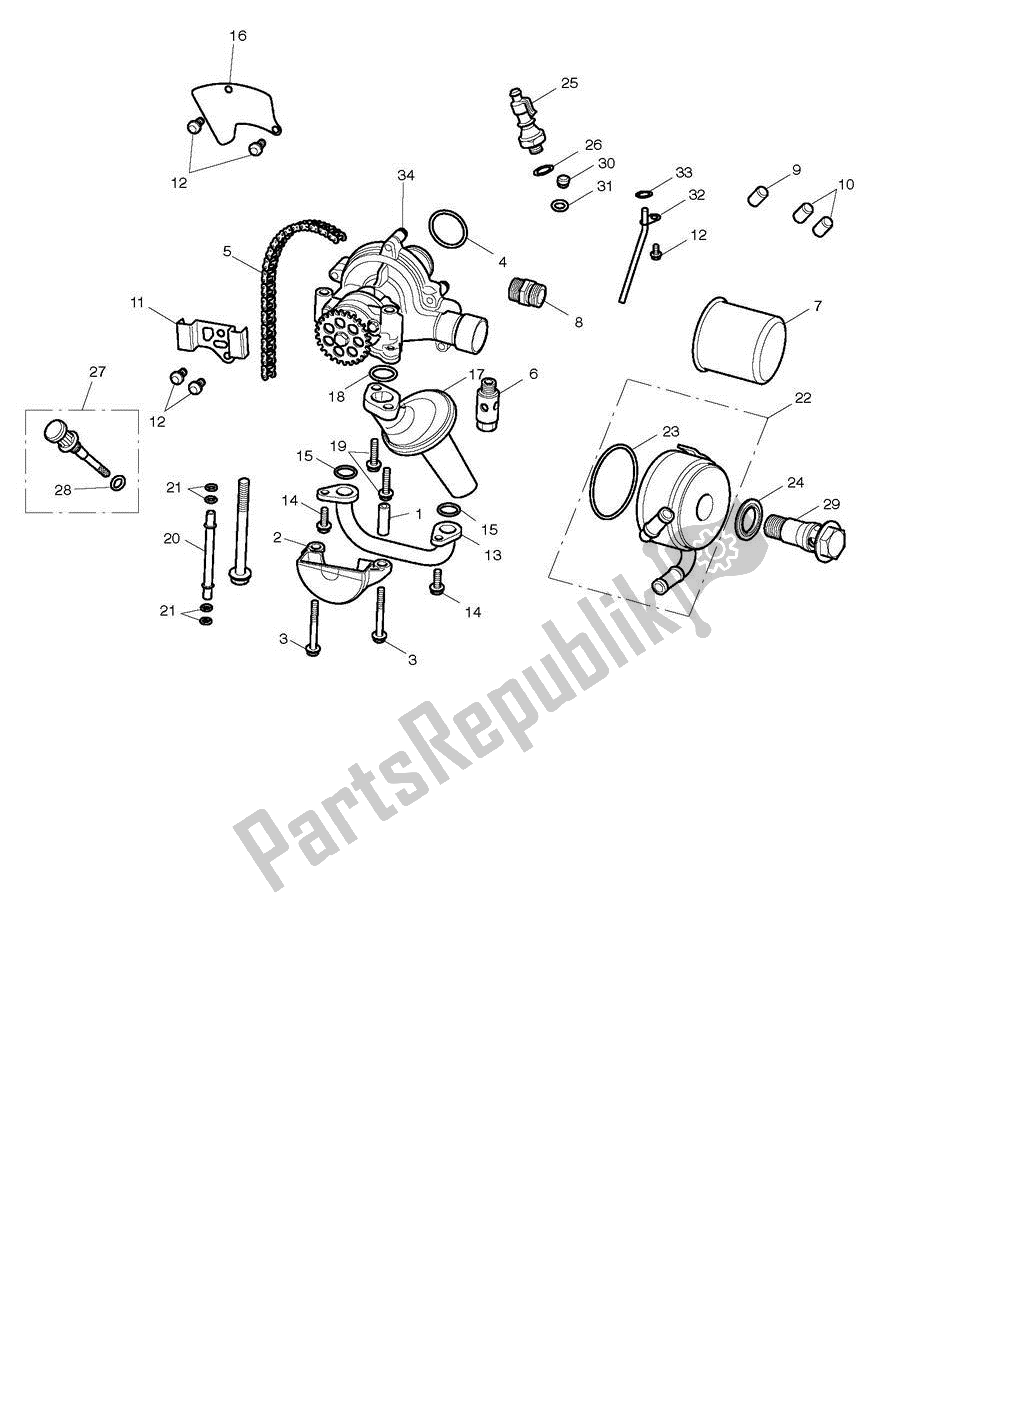 All parts for the Oil Pump Drive of the Triumph Street Triple 675 2008 - 2012